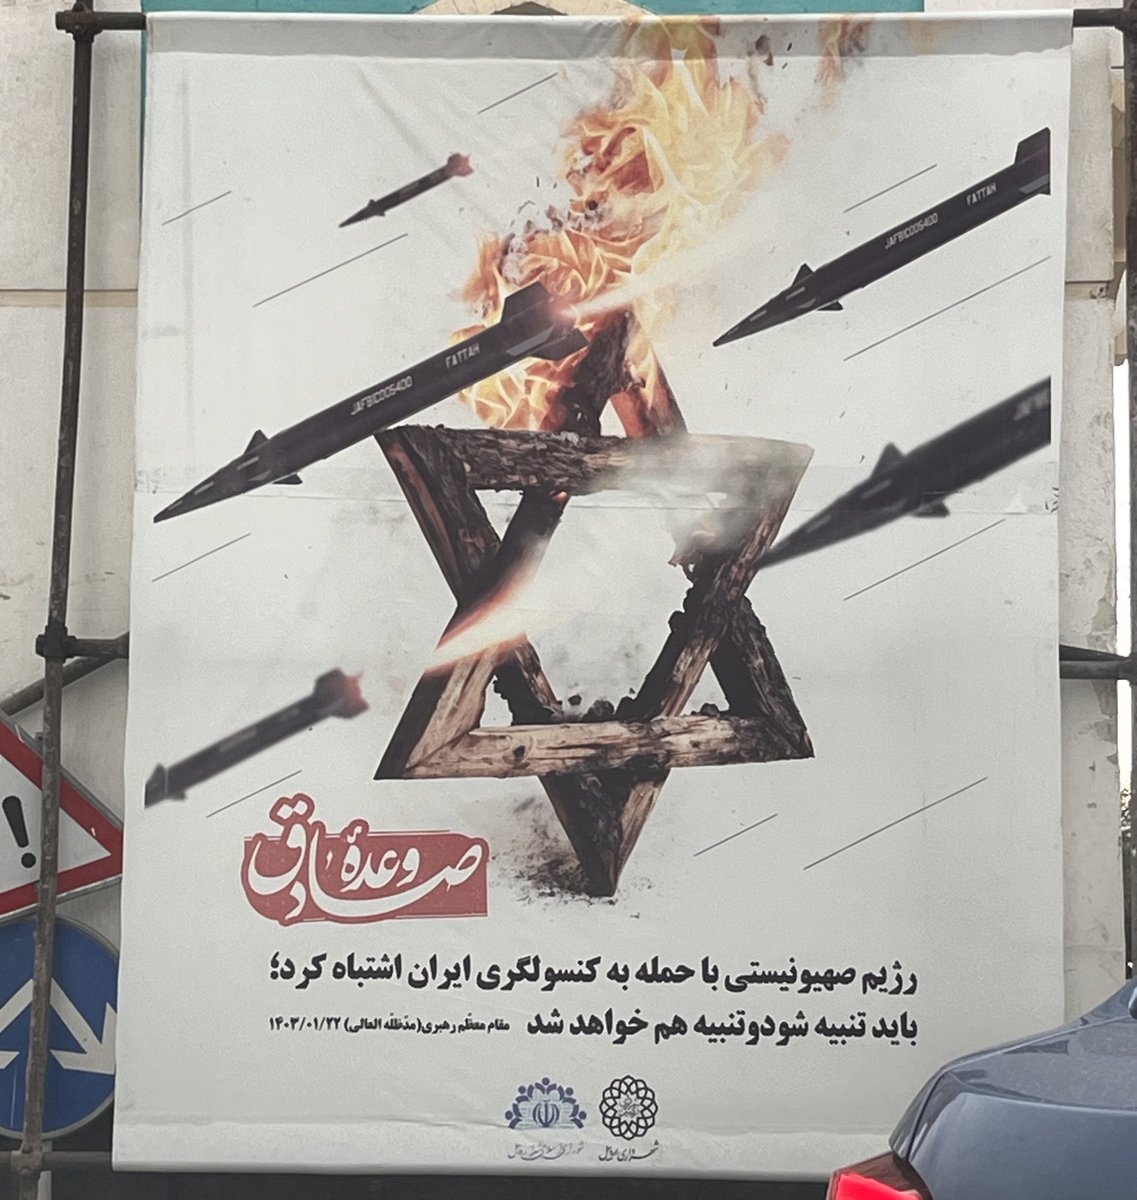 Spotted at a roundabout in Ardabil, Iran. Those missiles are thé Fattah-1 hypersonic missiles I believe.